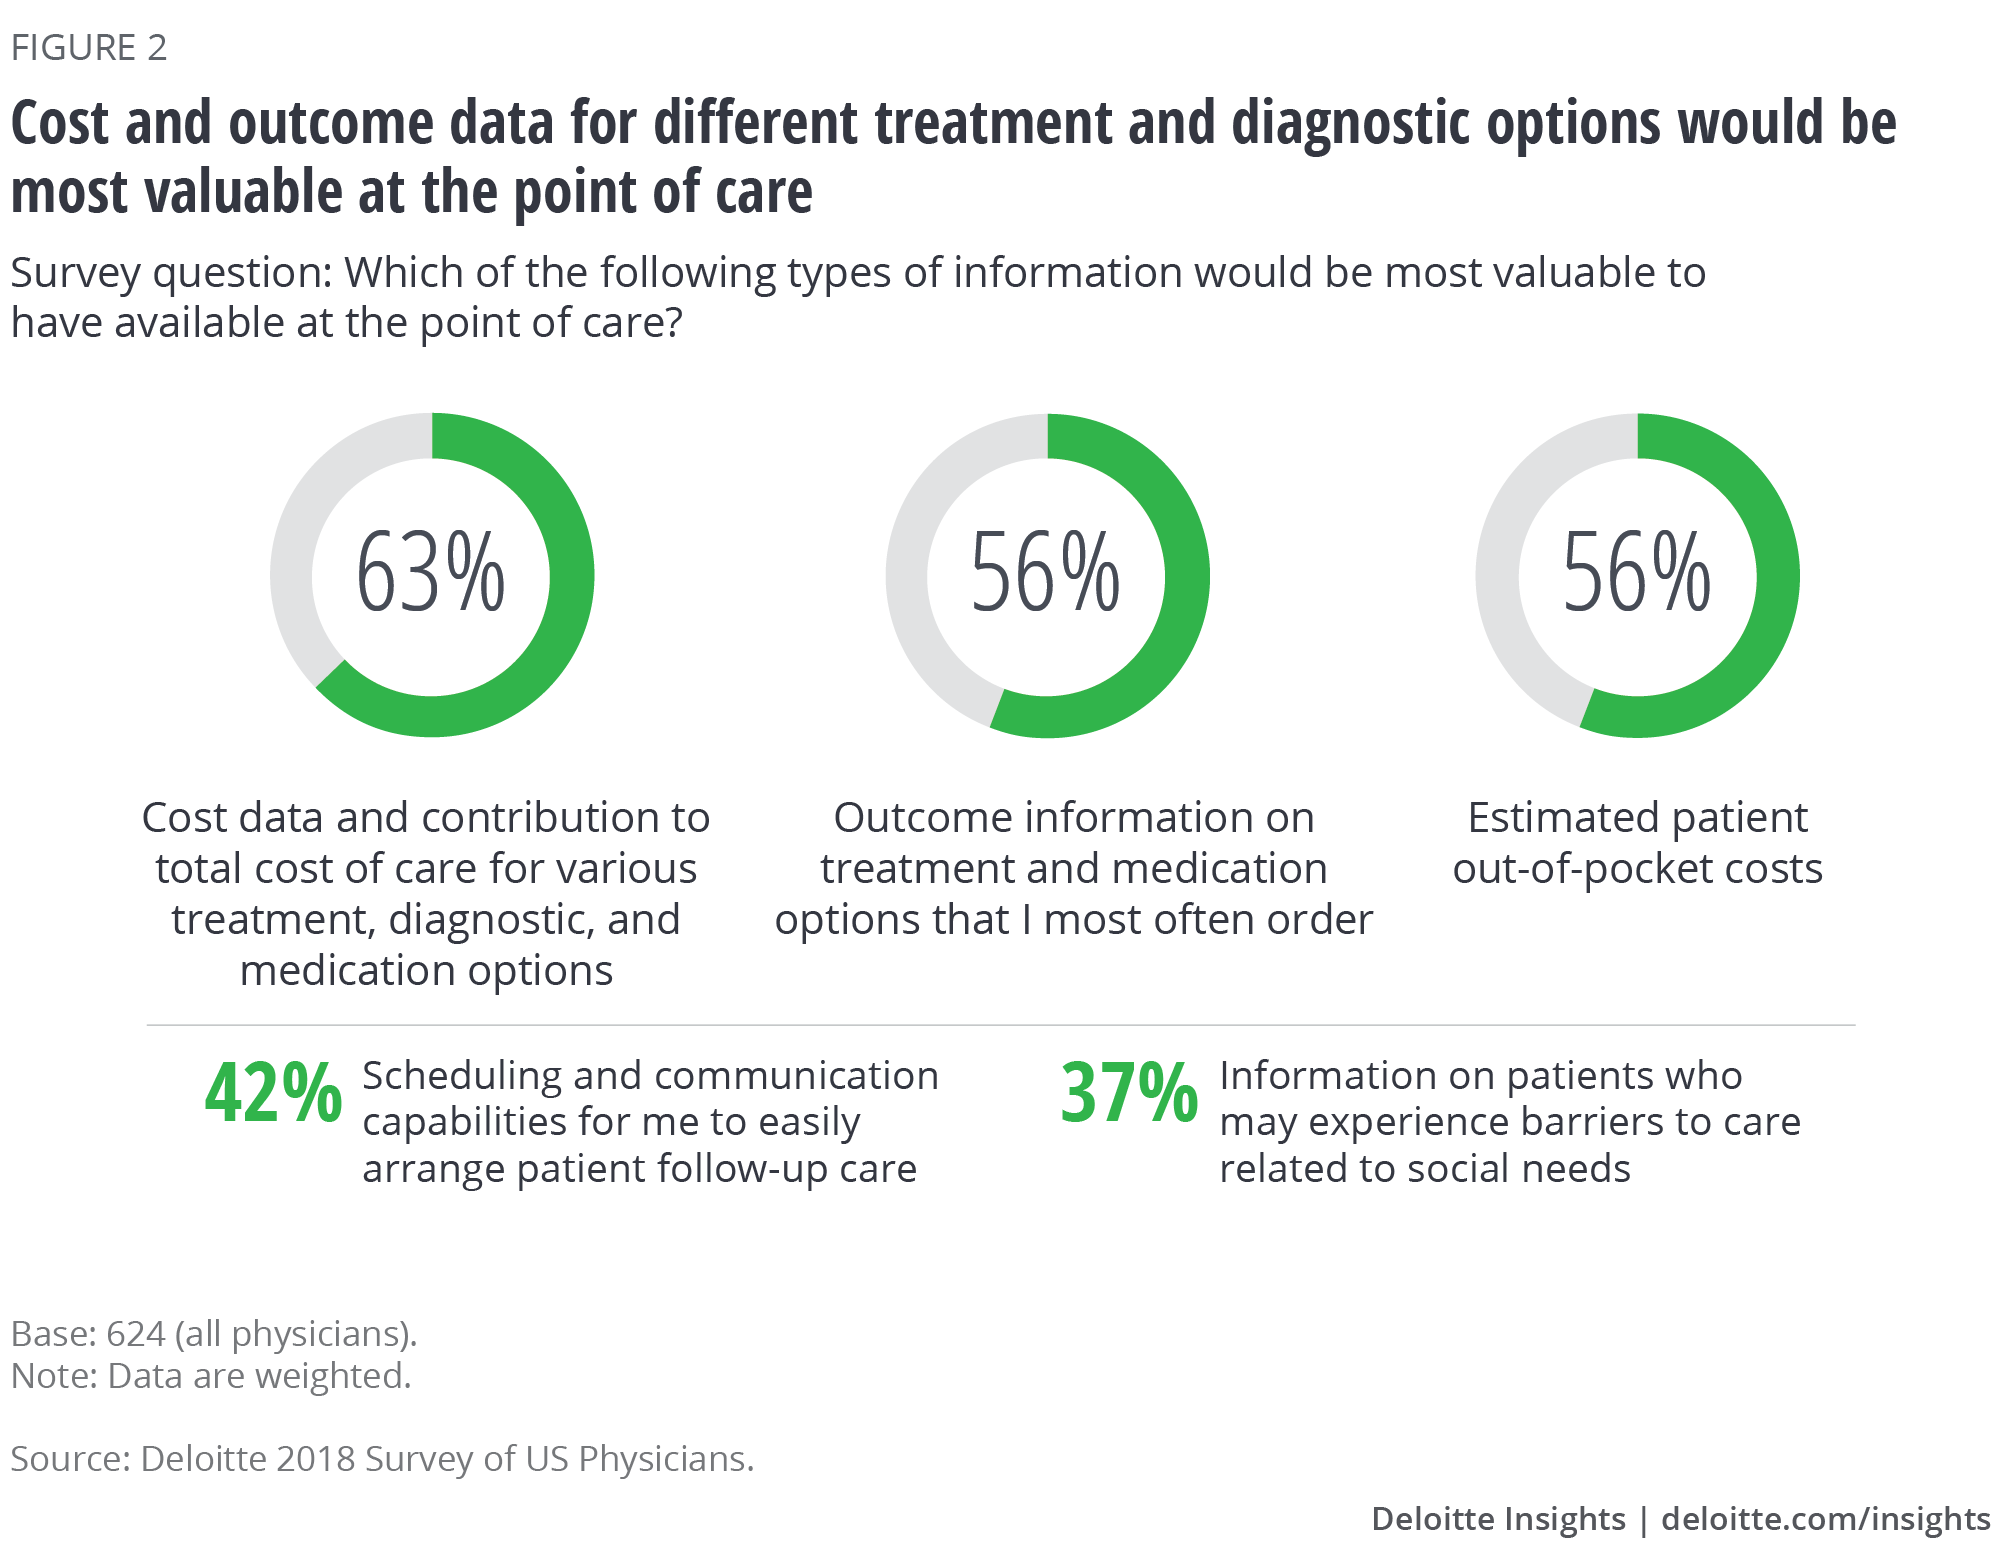 Cost and outcome data for different treatment and diagnostic options would be most valuable at the point of care